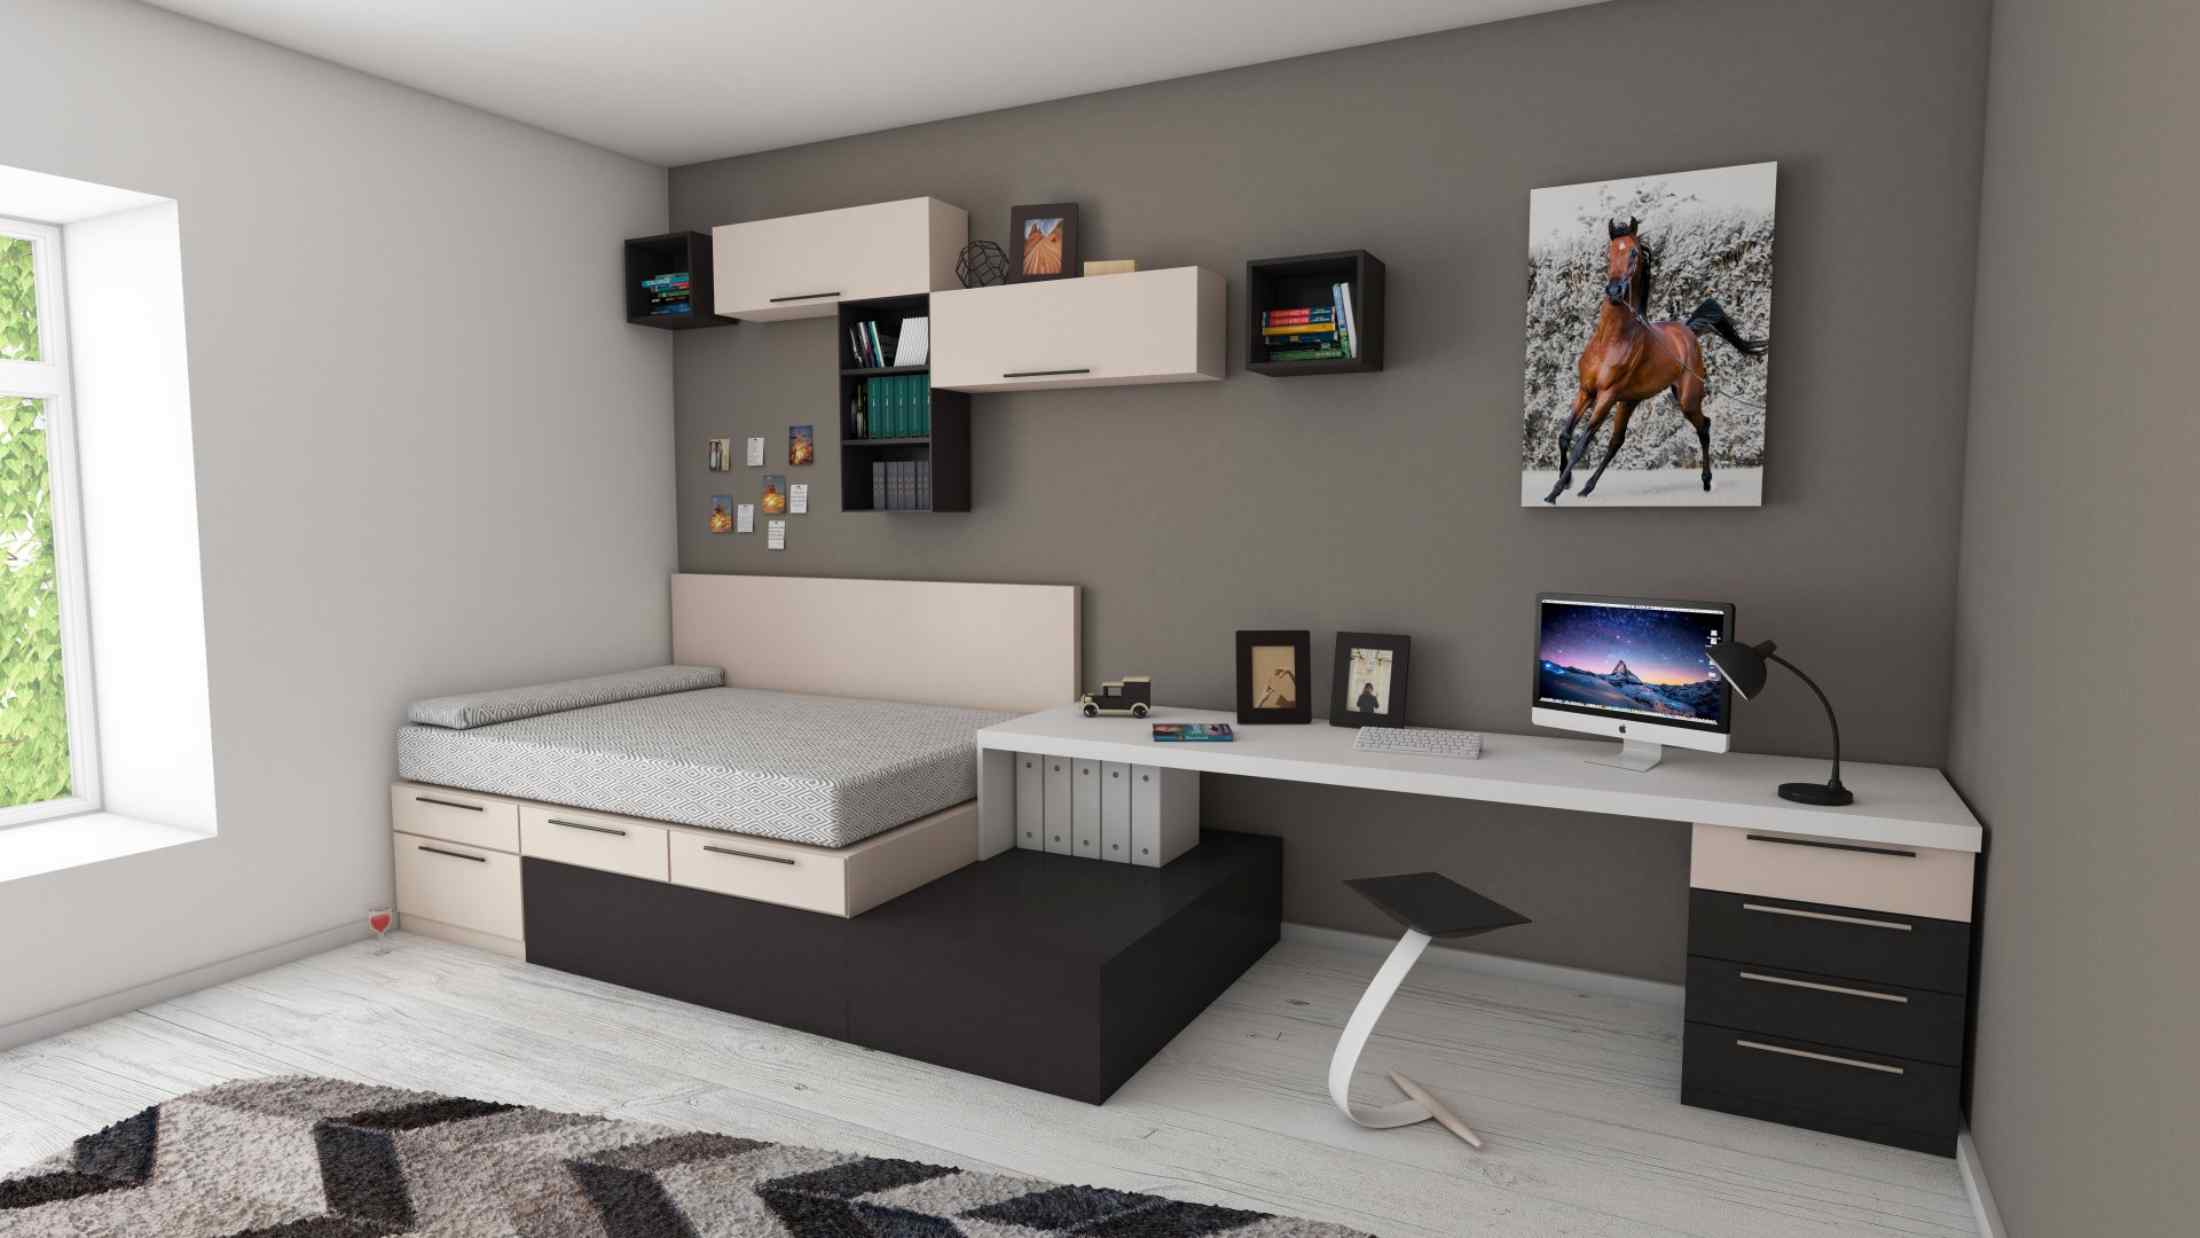 multipurpose bedroom space with integrated desk bed and shelving